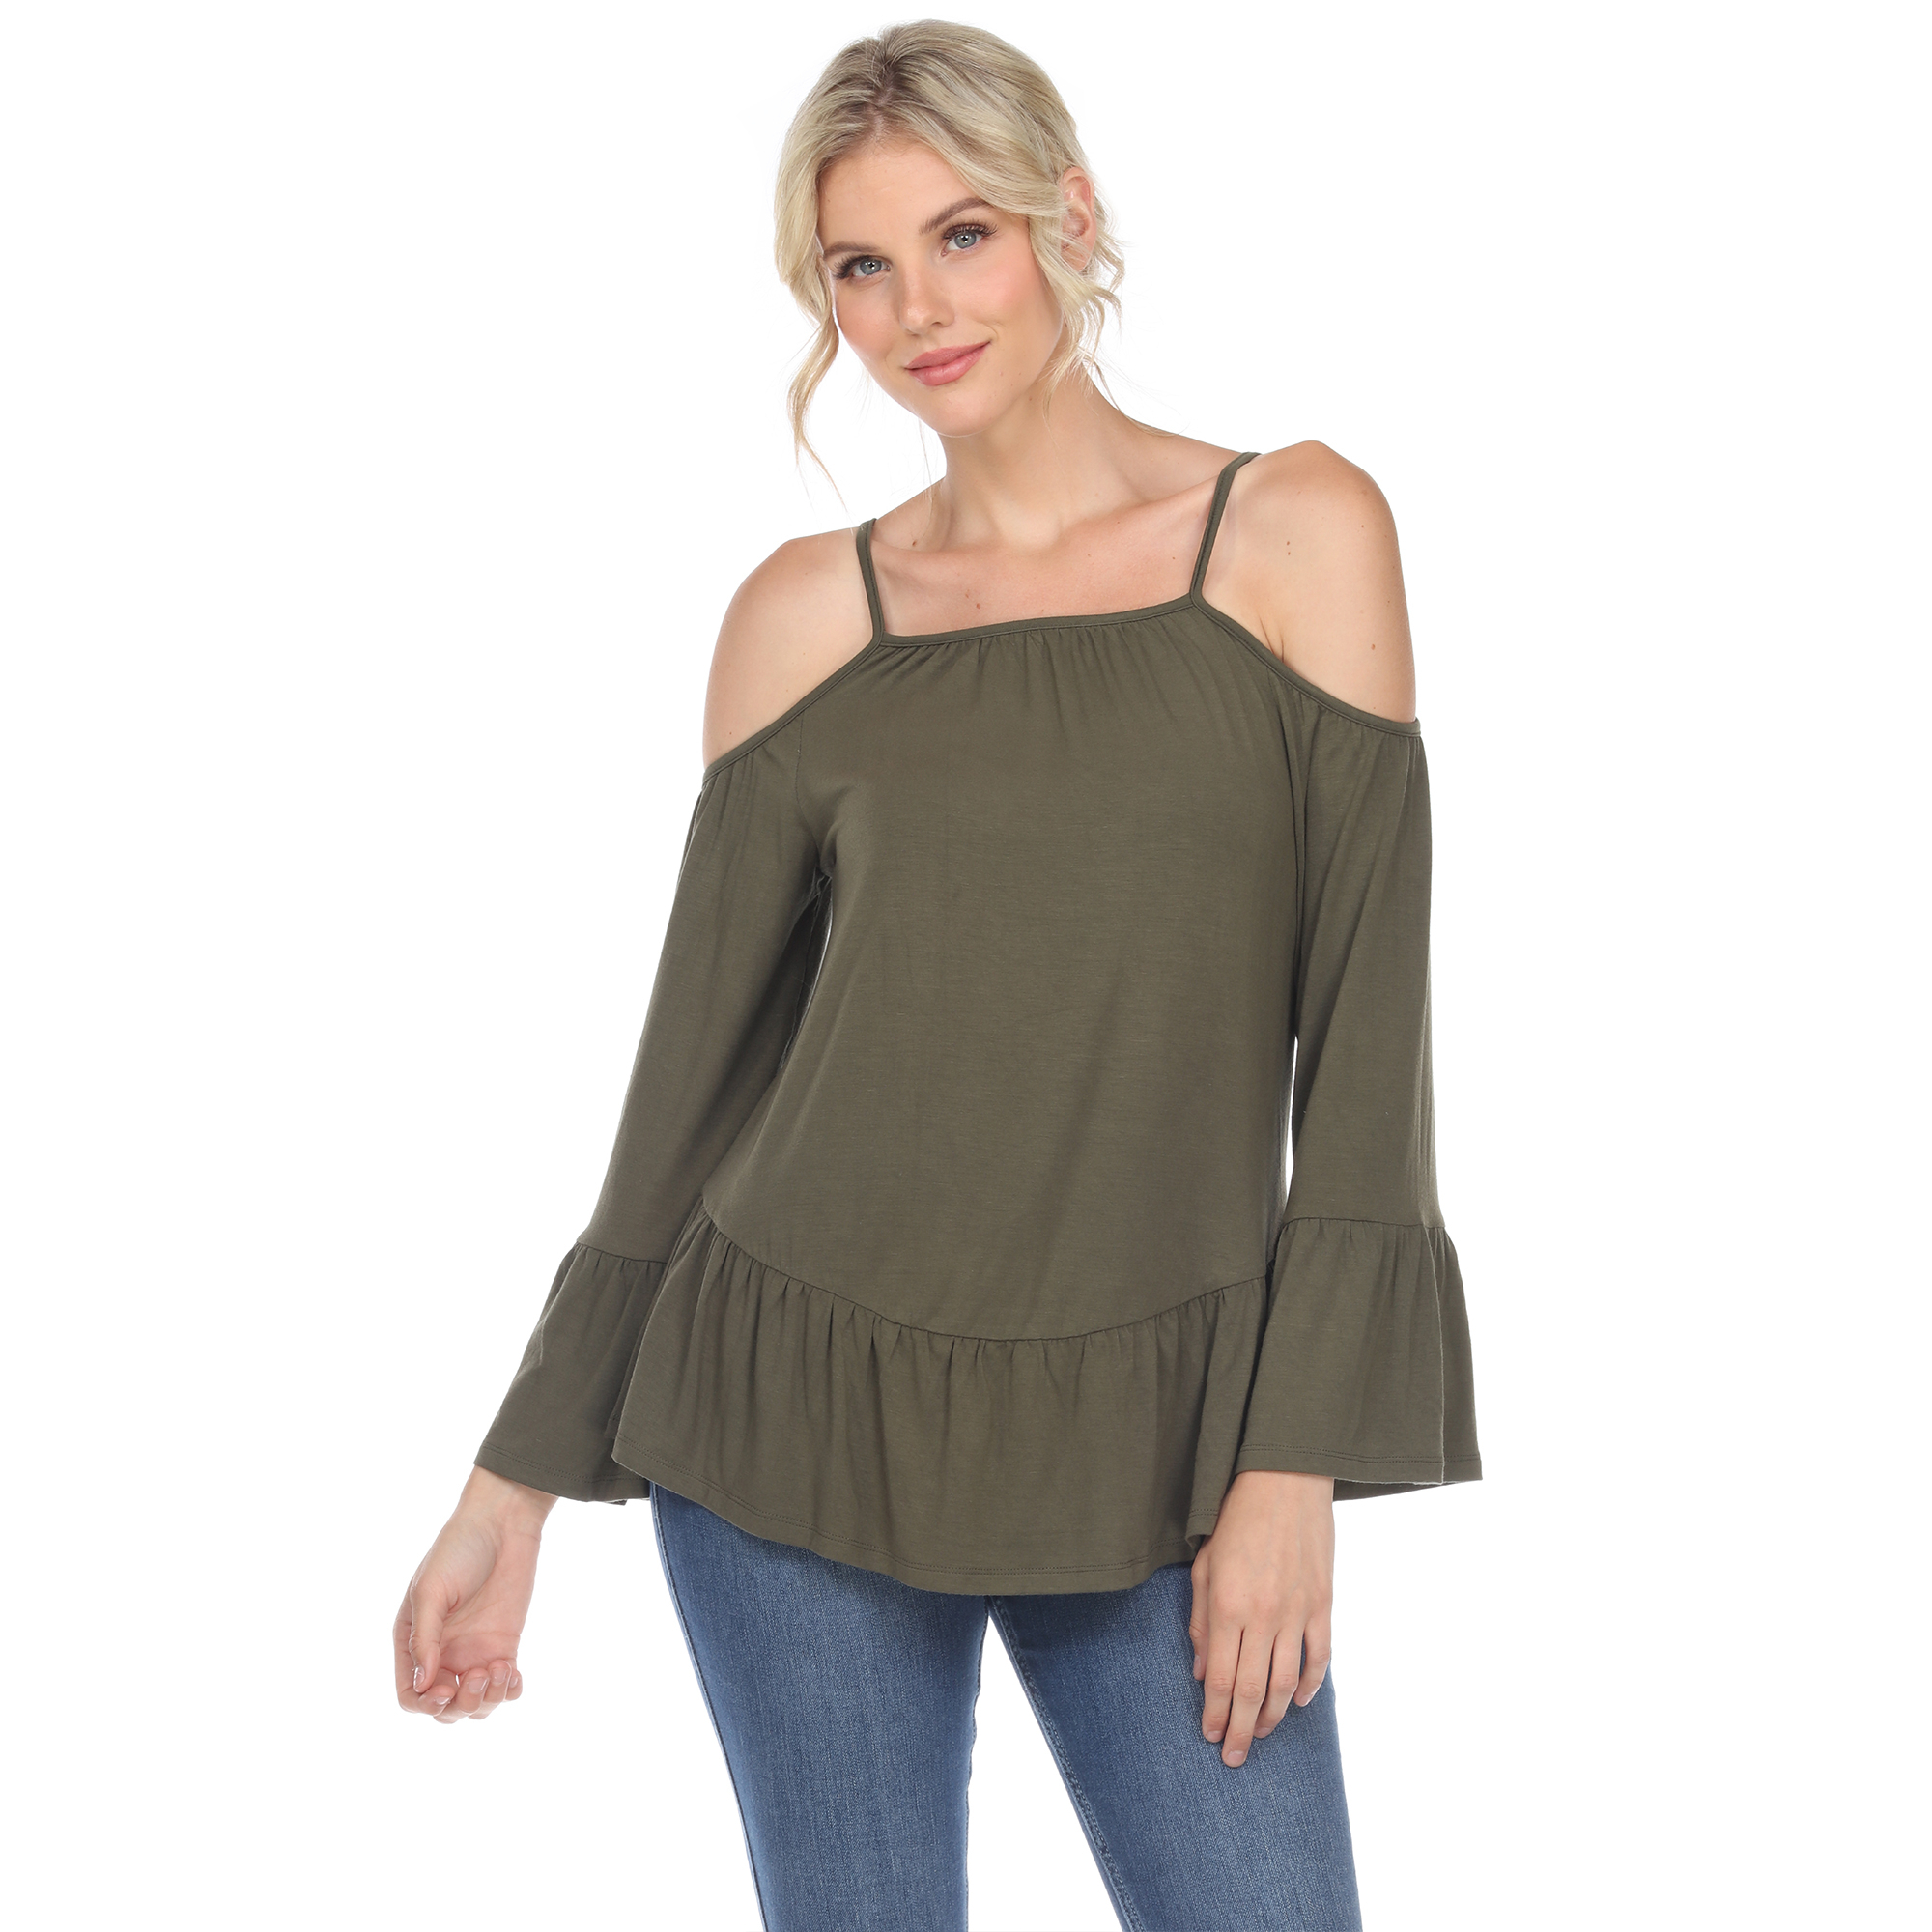 White Mark Women's Cold Shoulder Ruffle Sleeve Top - Olive, Large